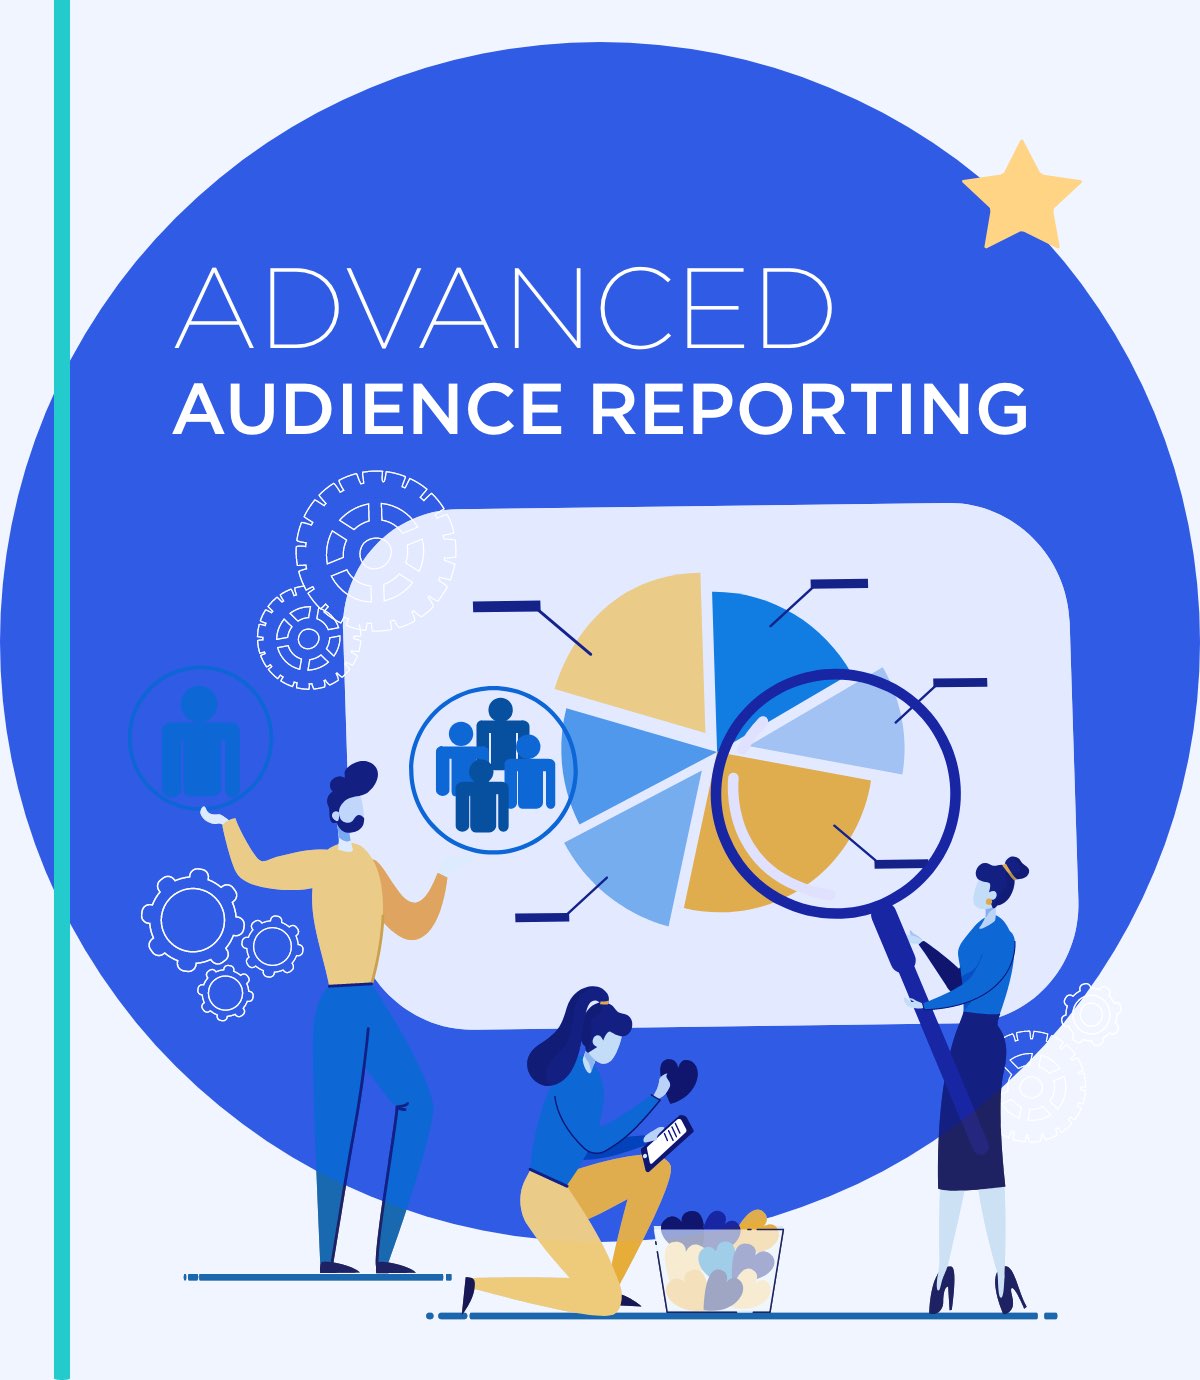 Audience Reporting